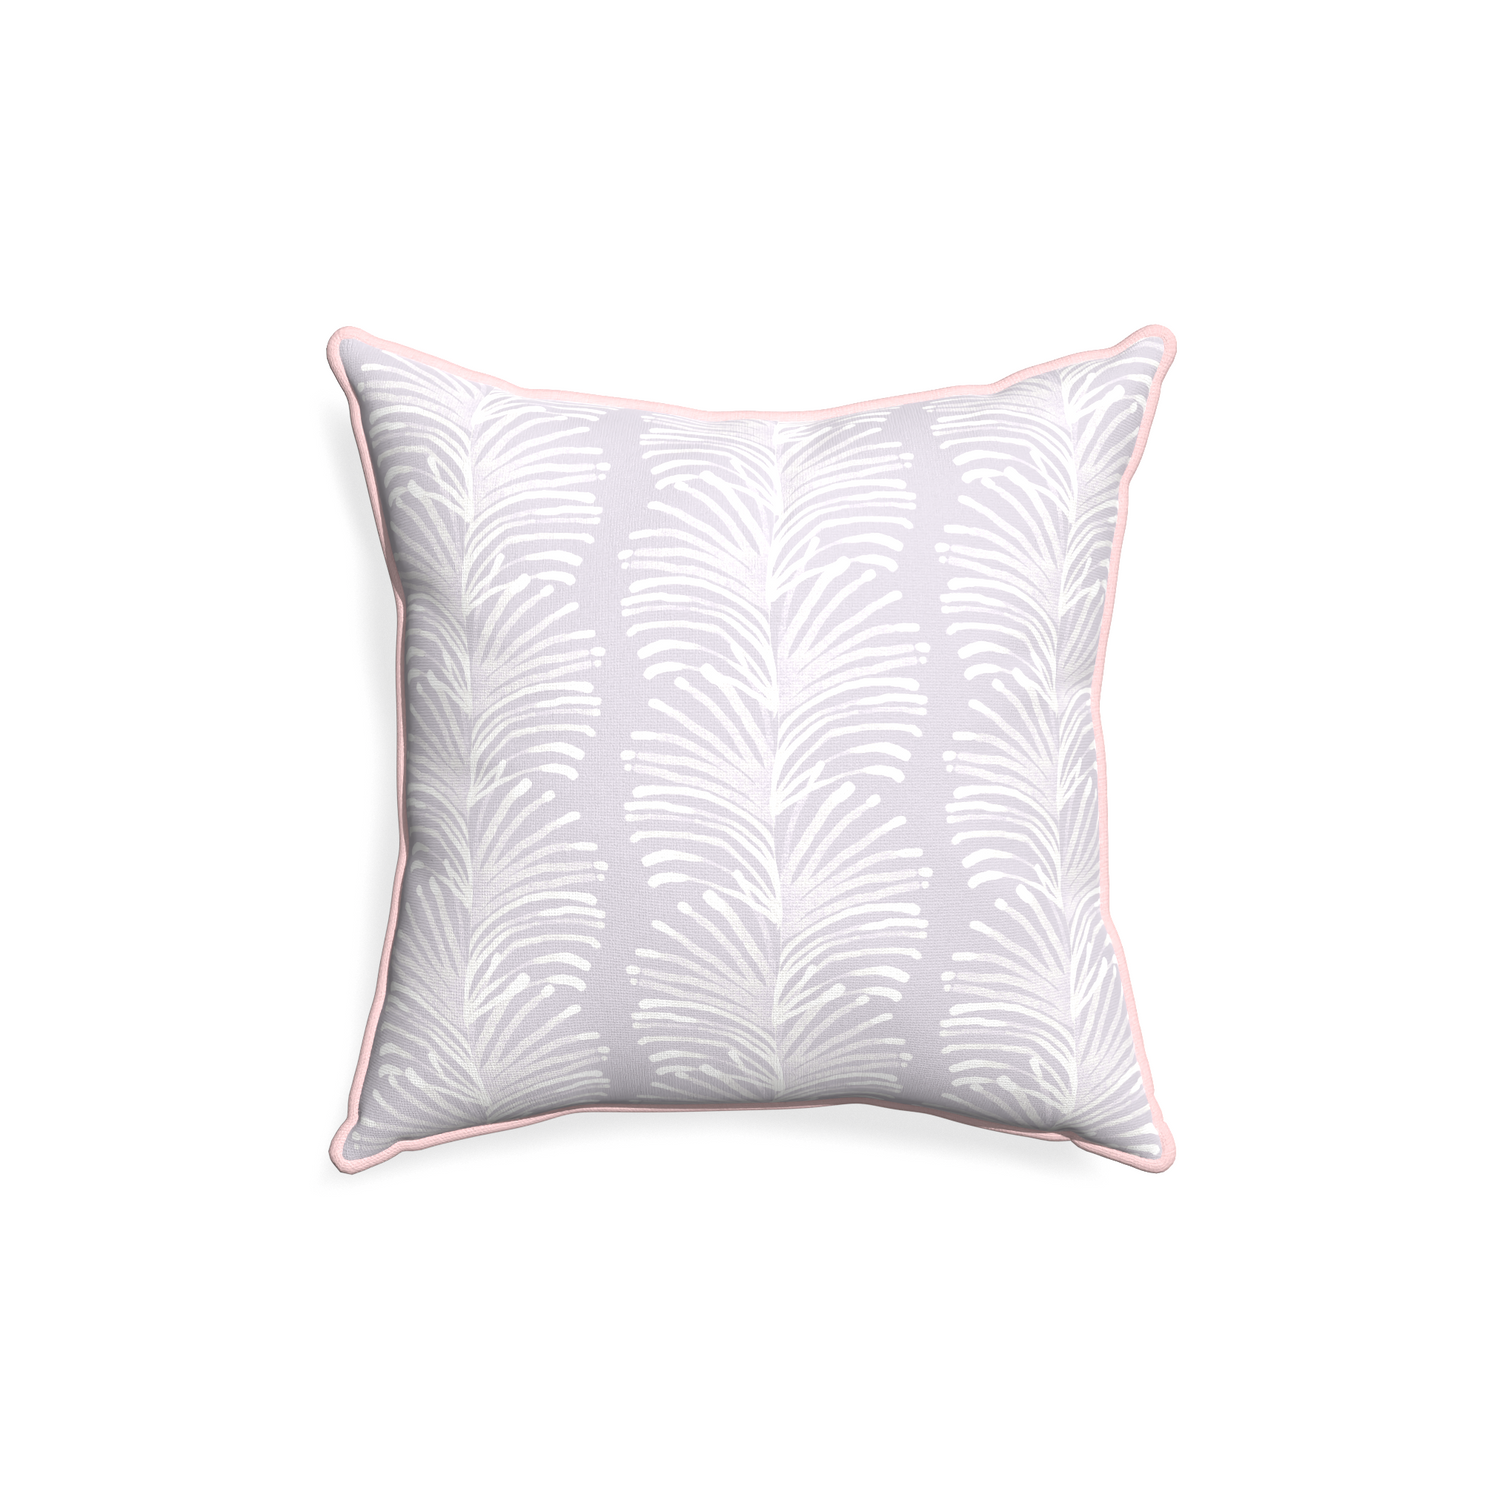 18-square emma lavender custom pillow with petal piping on white background